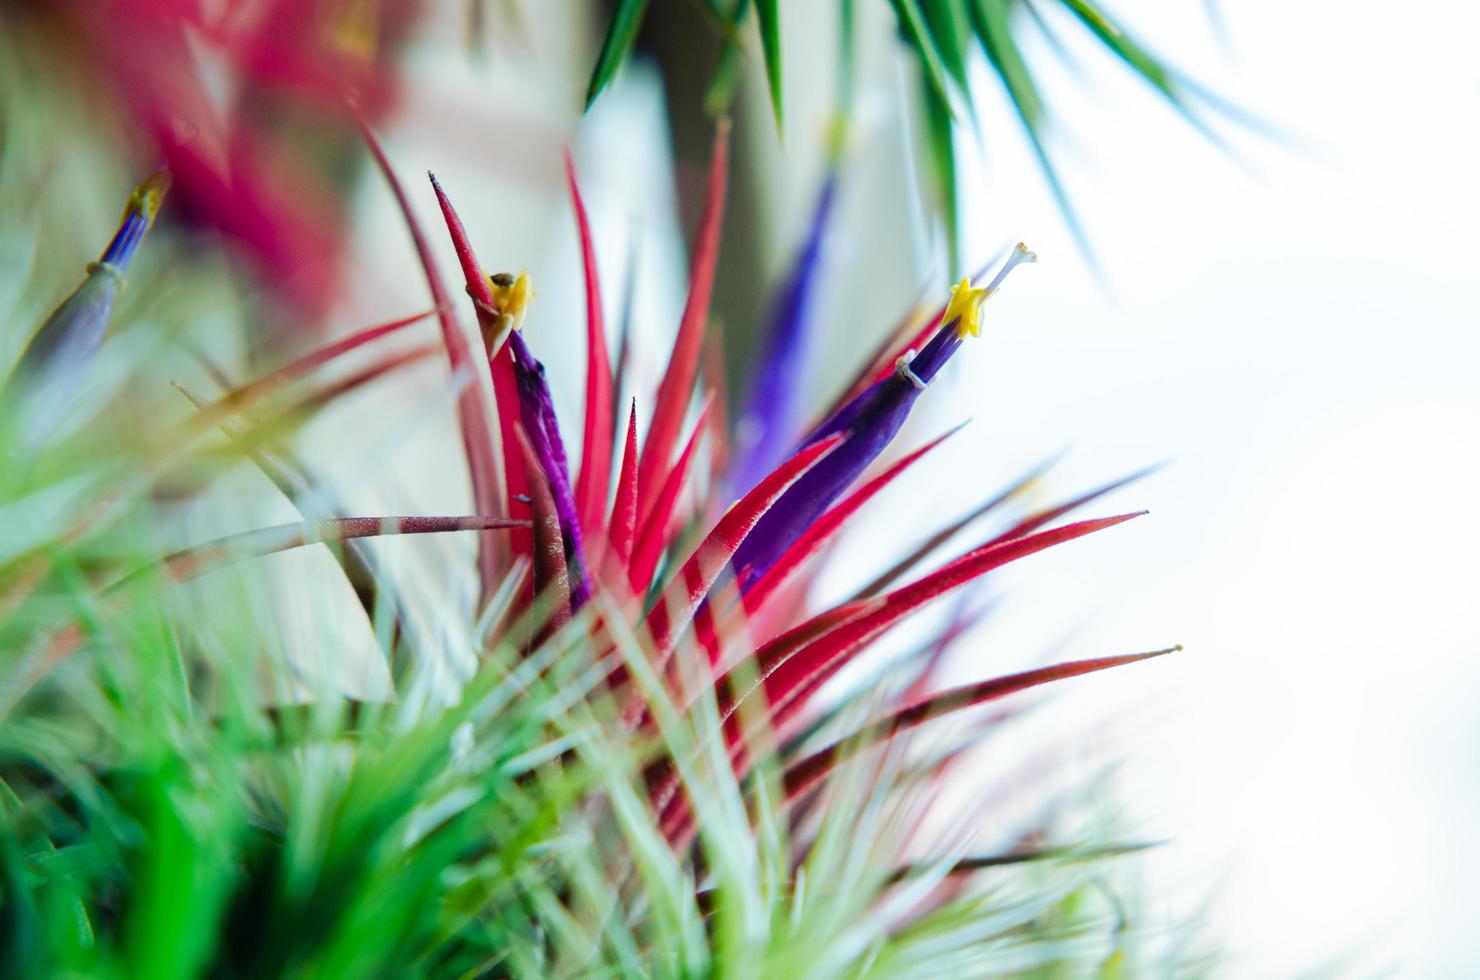 Tillandsia or Air plant which is grows without soil attached with the wood with its colorful flowers. photo